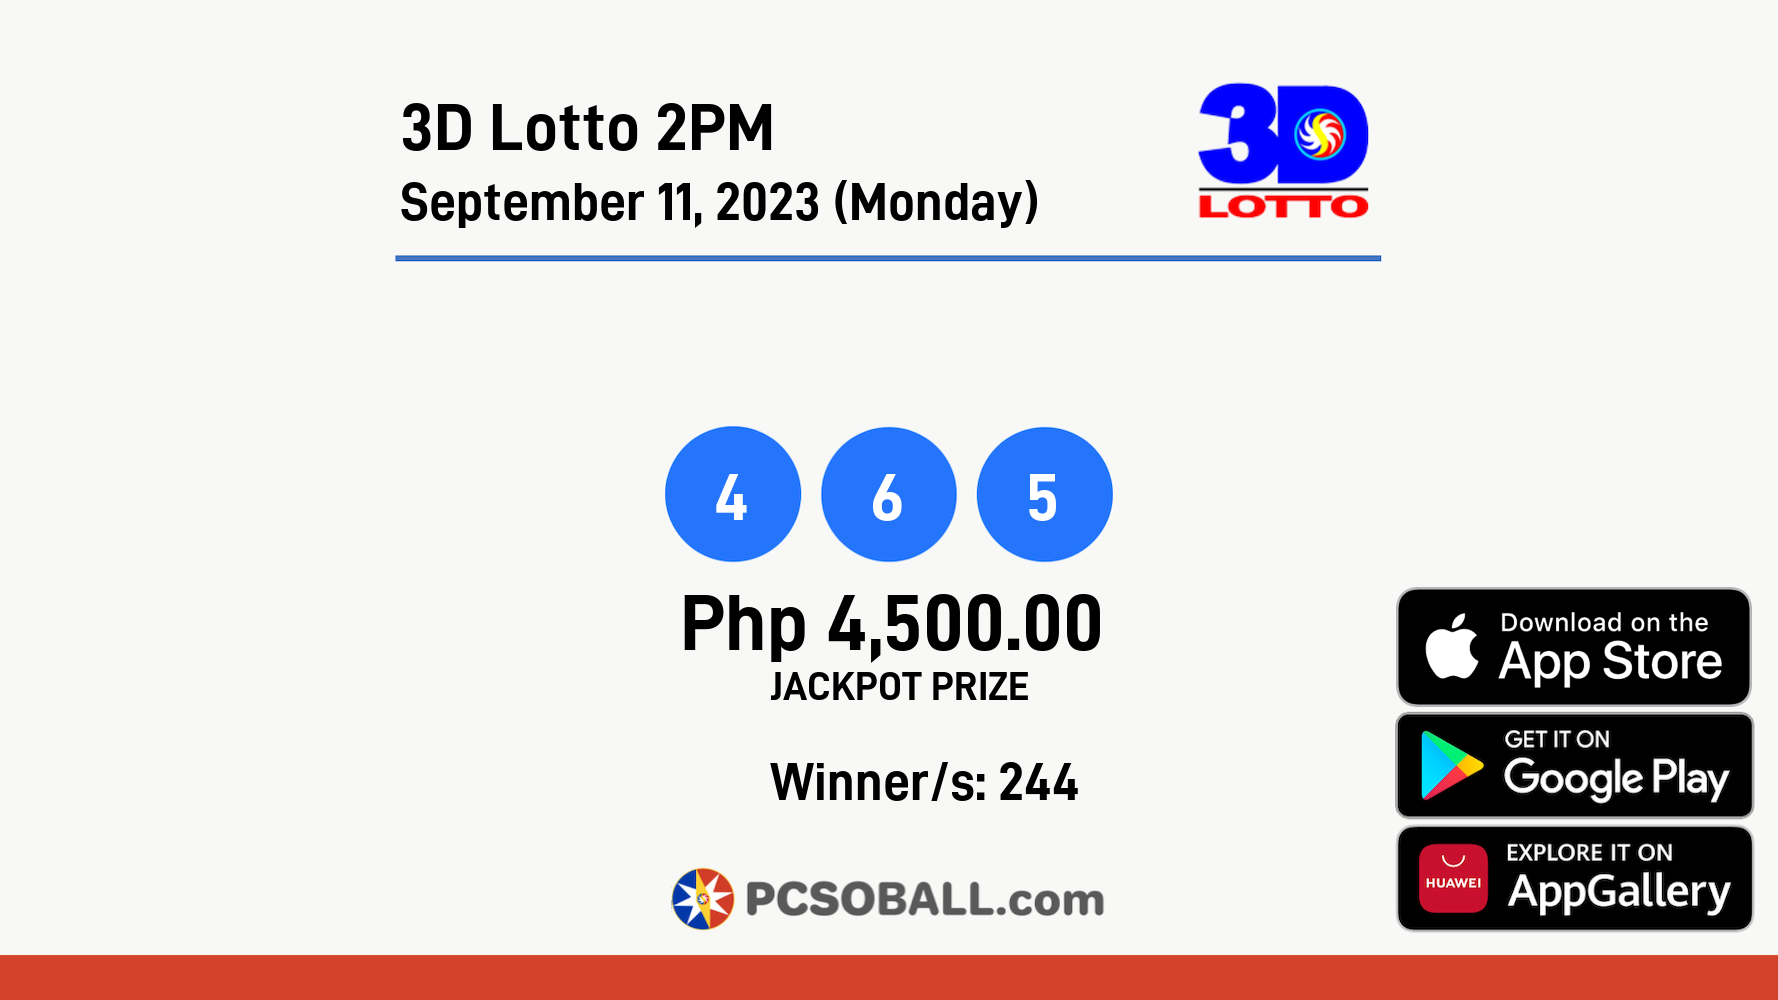 3D Lotto 2PM September 11, 2023 (Monday) Result